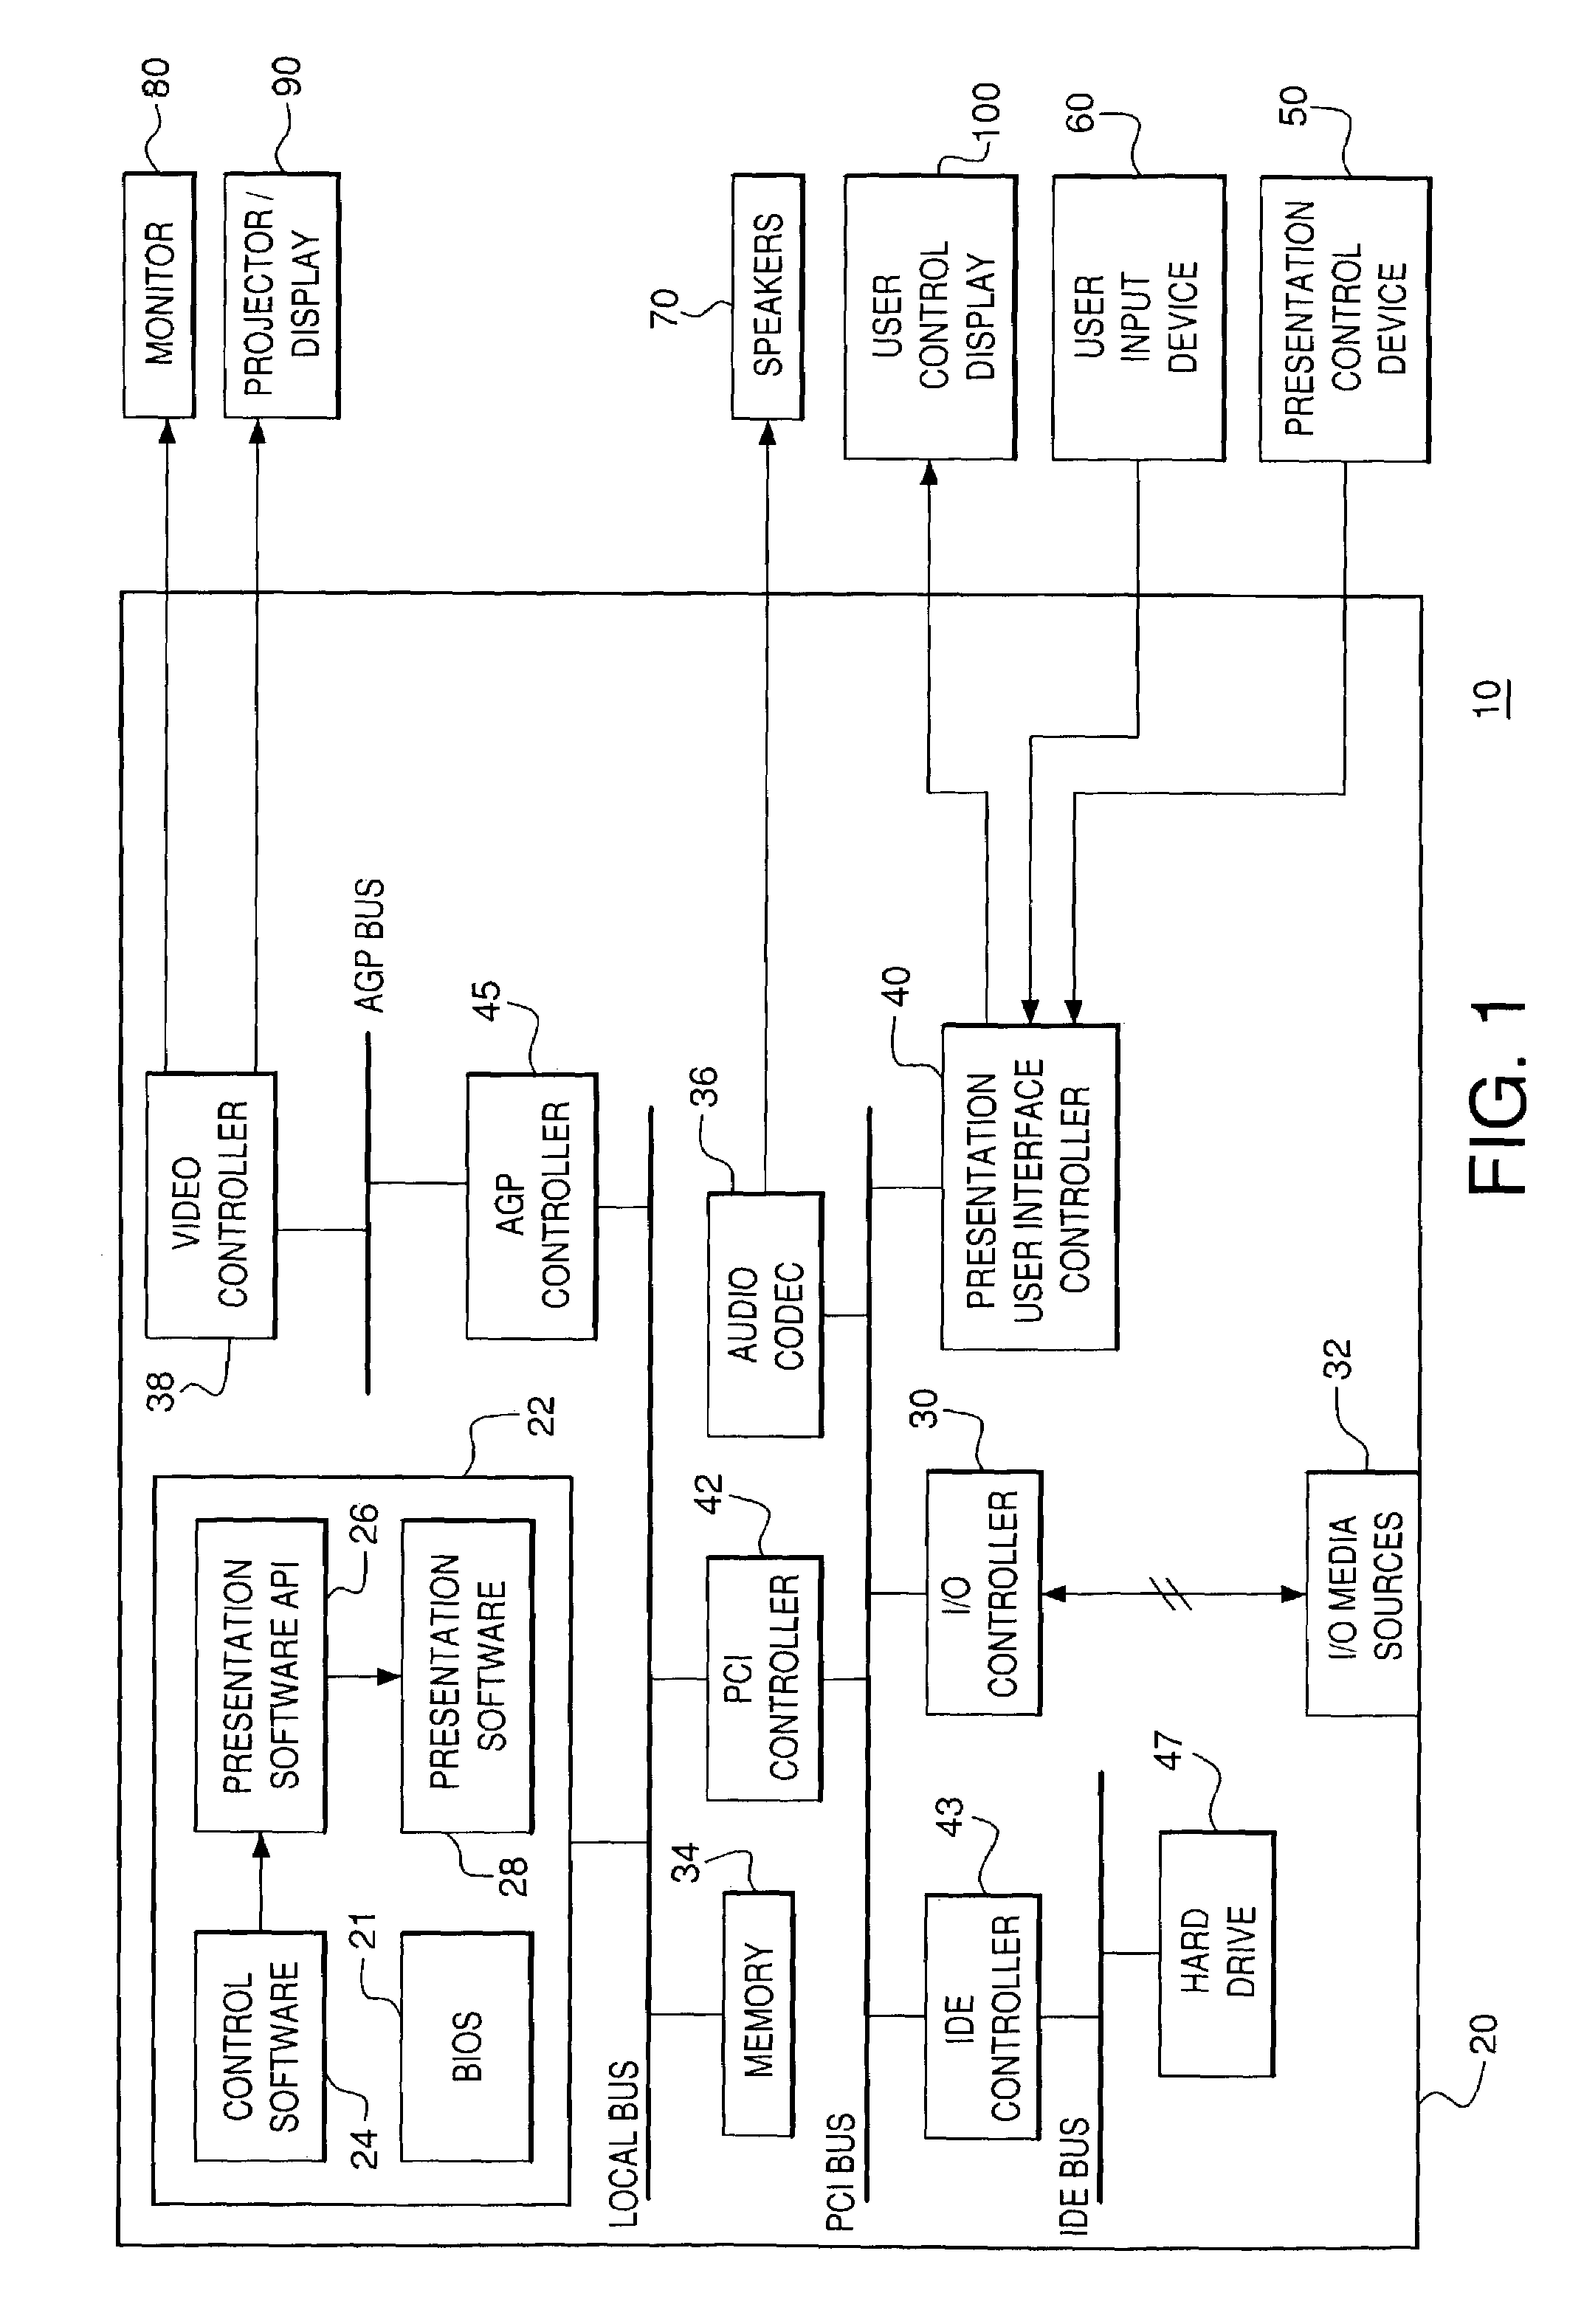 Programmed apparatus and system of dynamic display of presentation files